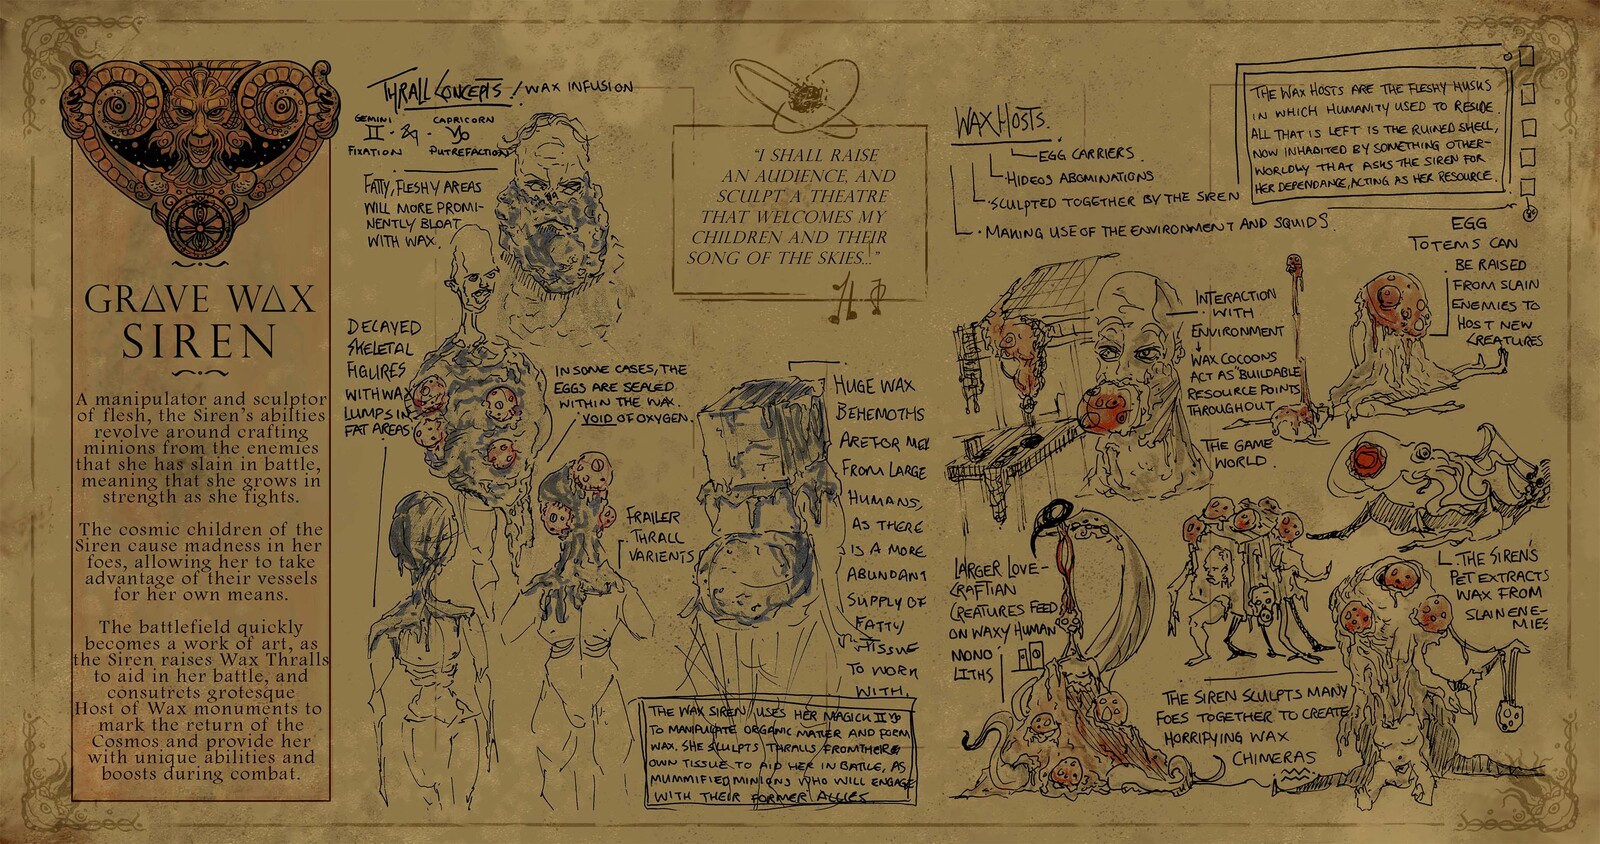 Sketch notes on Siren's Thralls